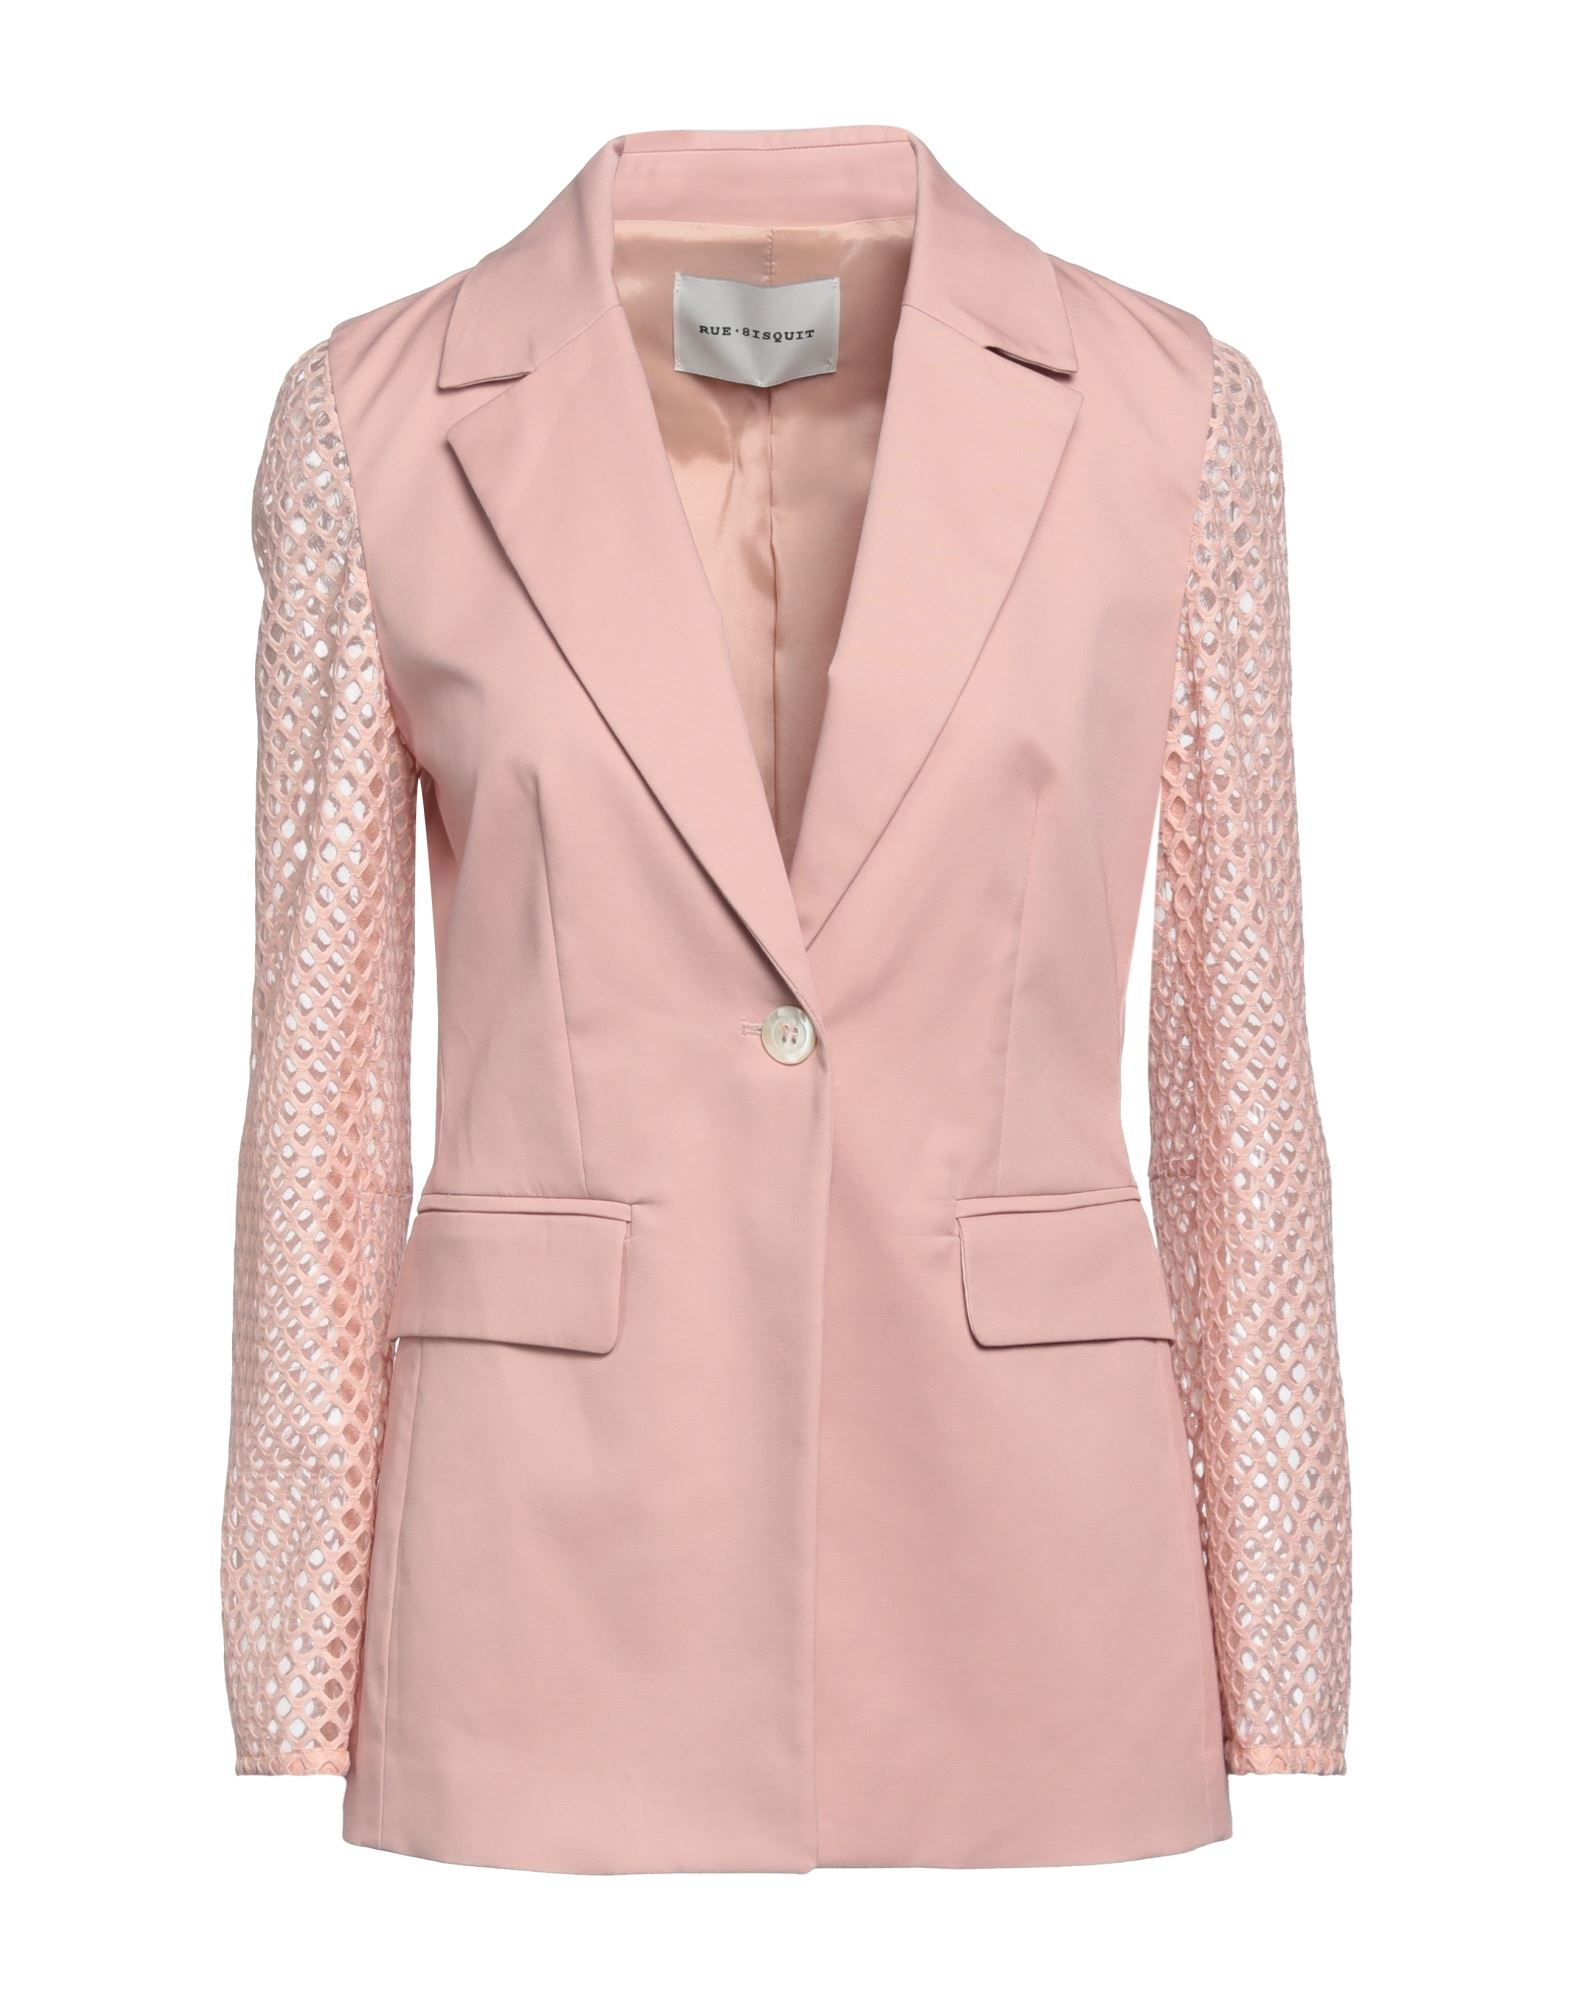 Rue 8isquit Suit Jackets In Pink